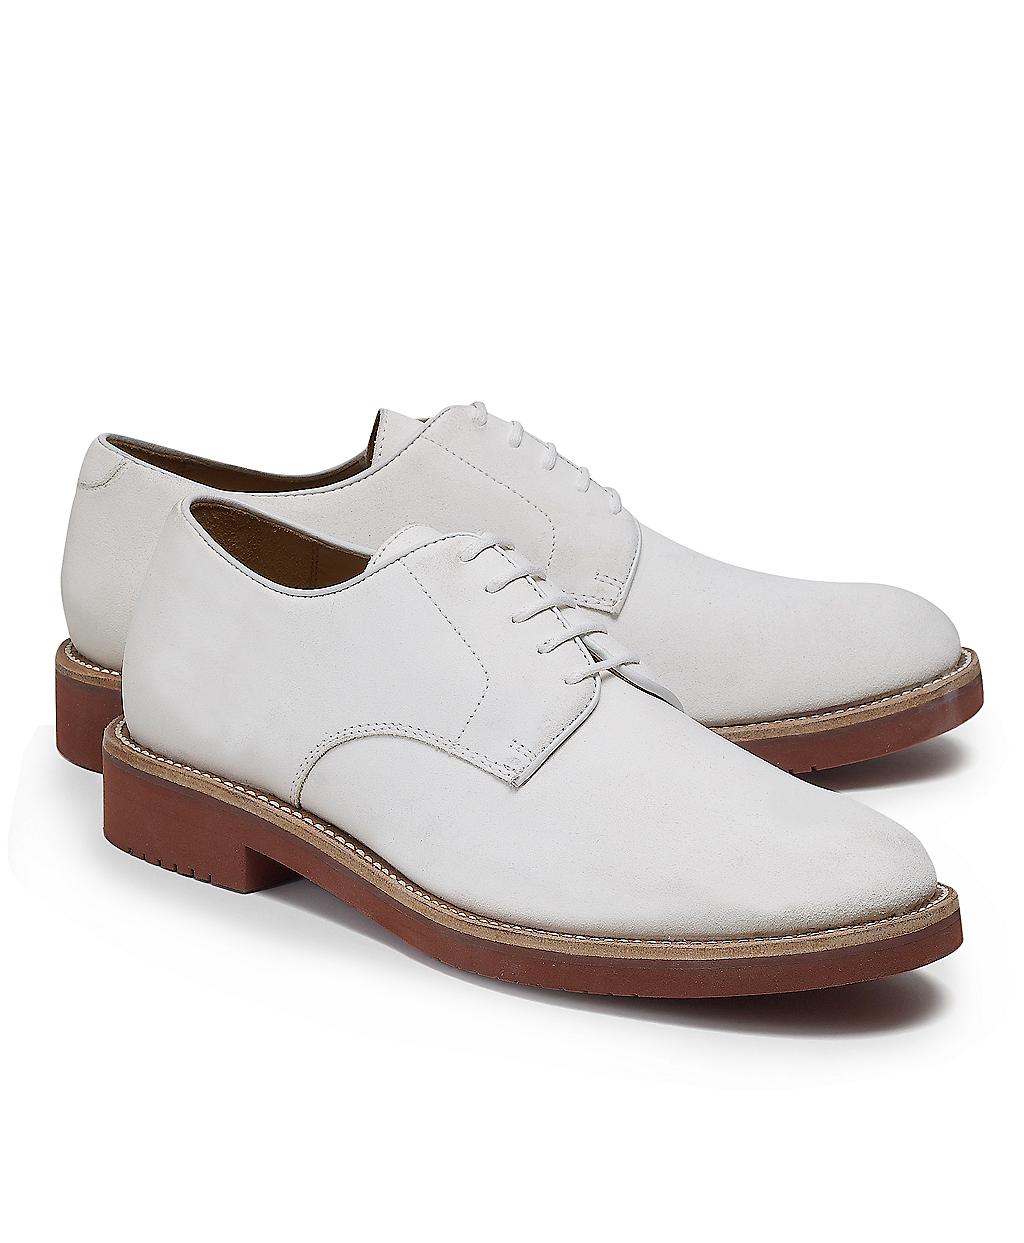 Brooks Brothers Classic Buck in White for Men - Lyst